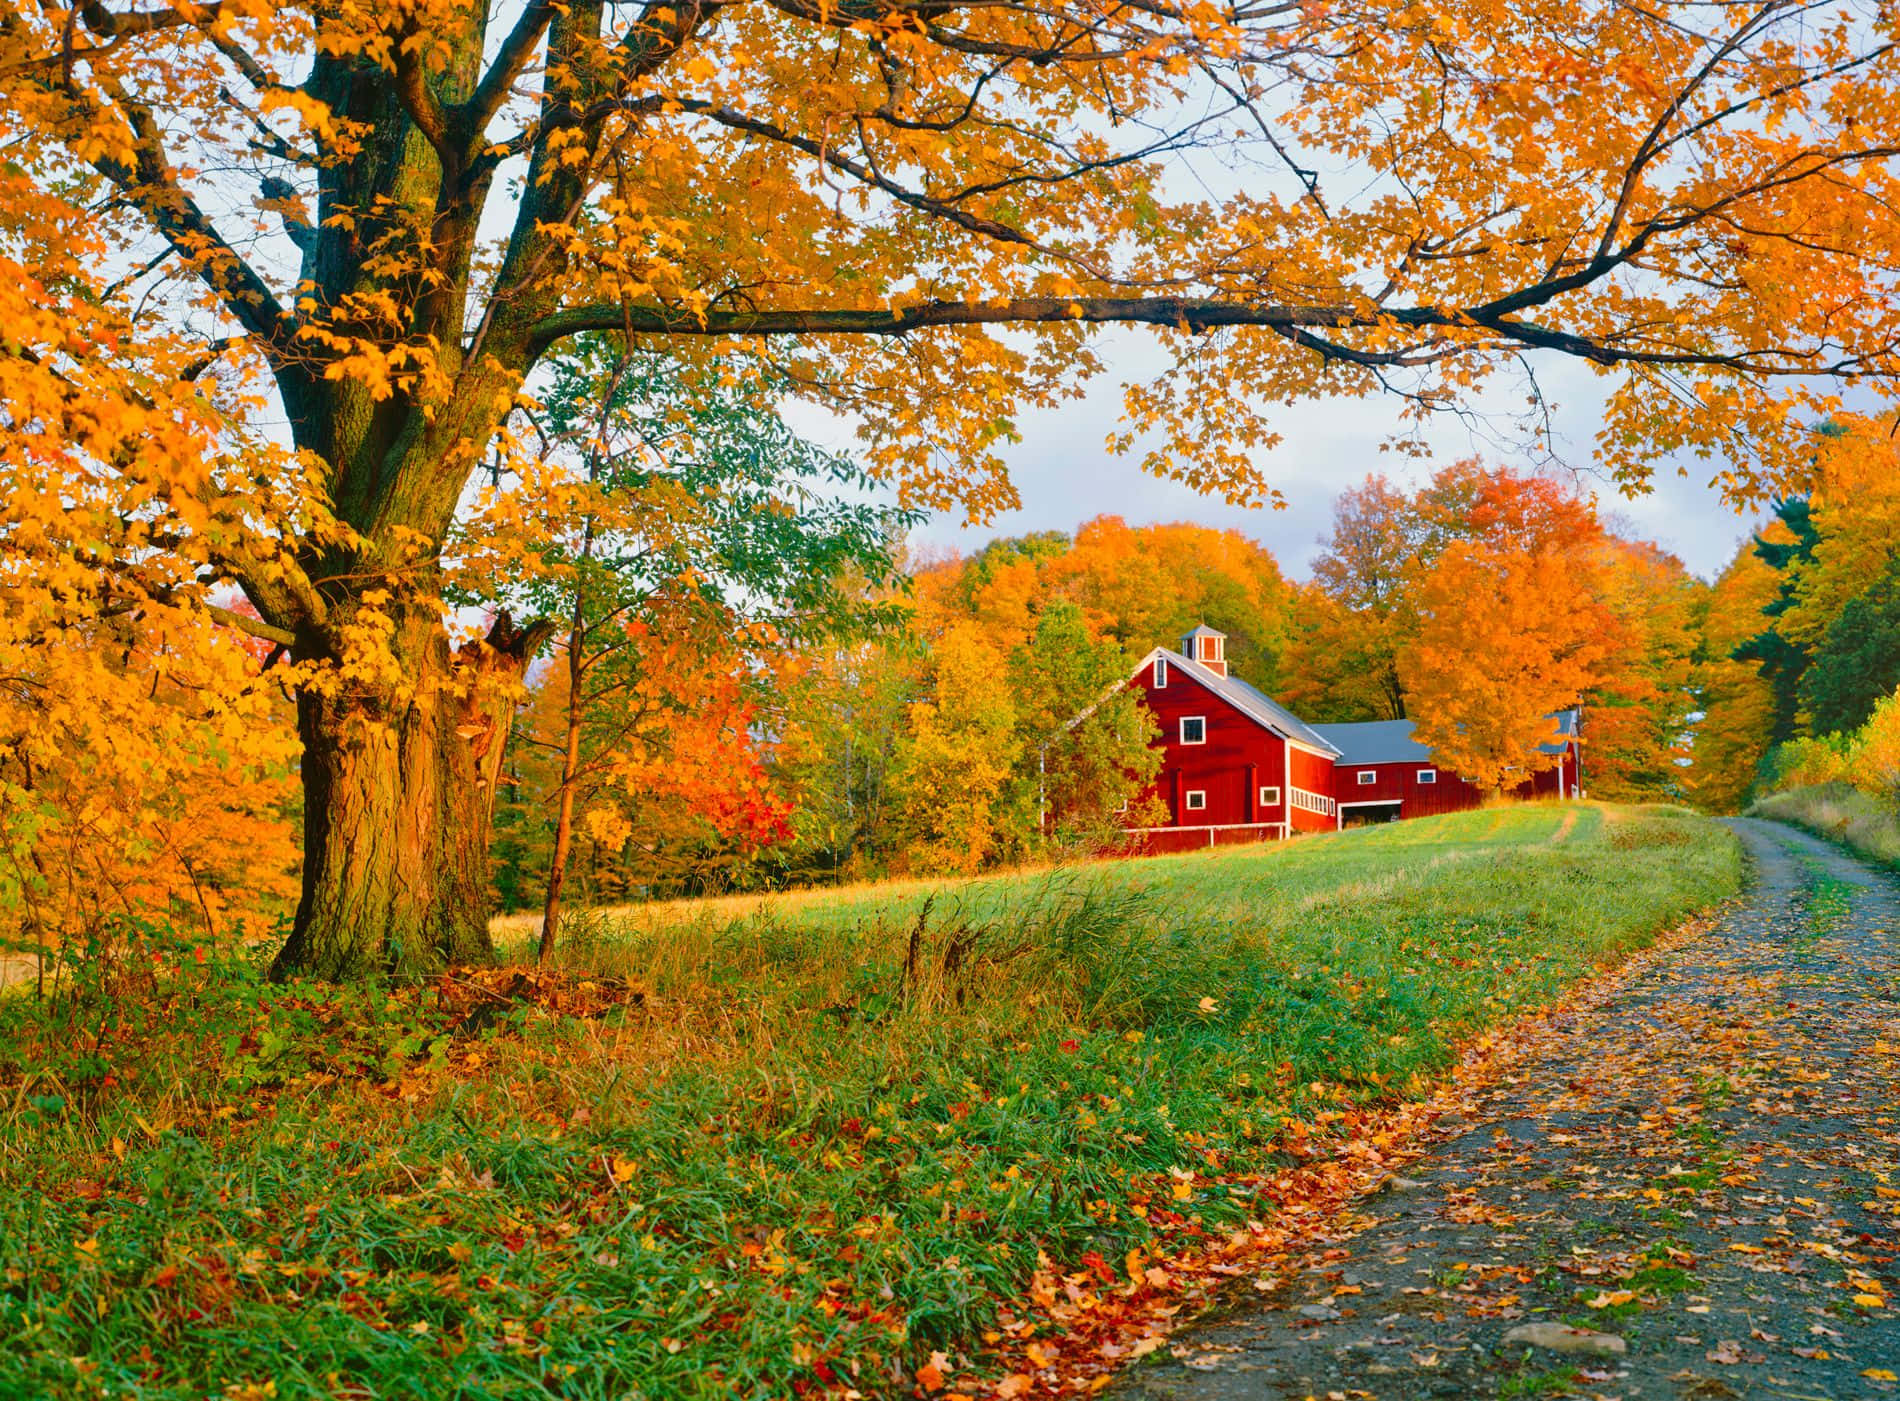 Fall Barn - A picturesque countryside scene with a rustic barn surrounded by vibrant autumn colors Wallpaper